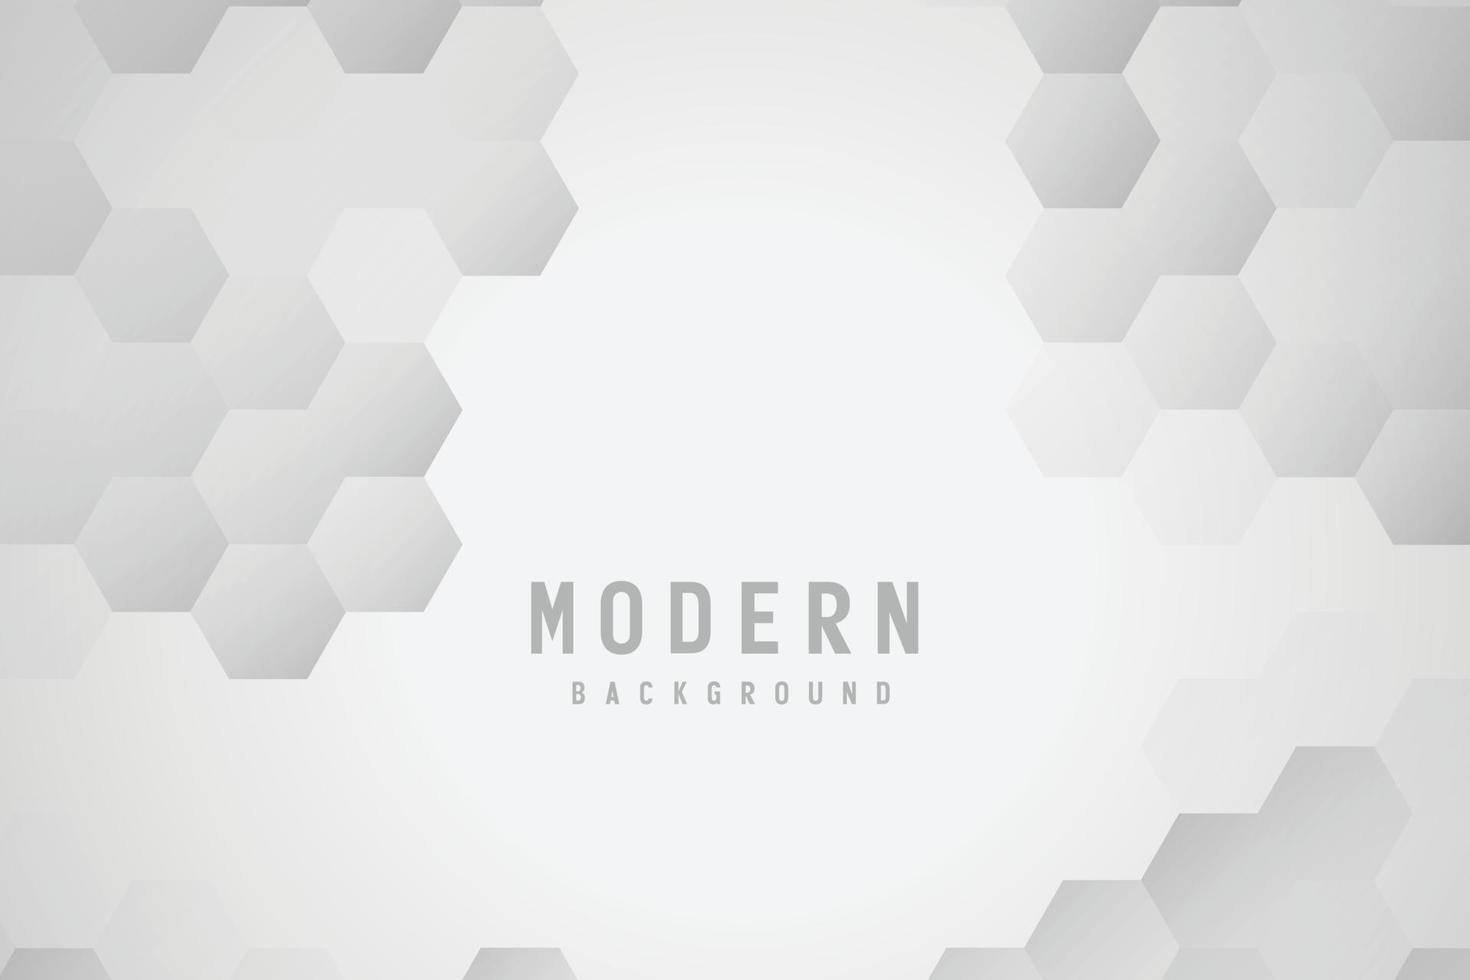 banner Abstract geometric white and gray color background vector illustration.